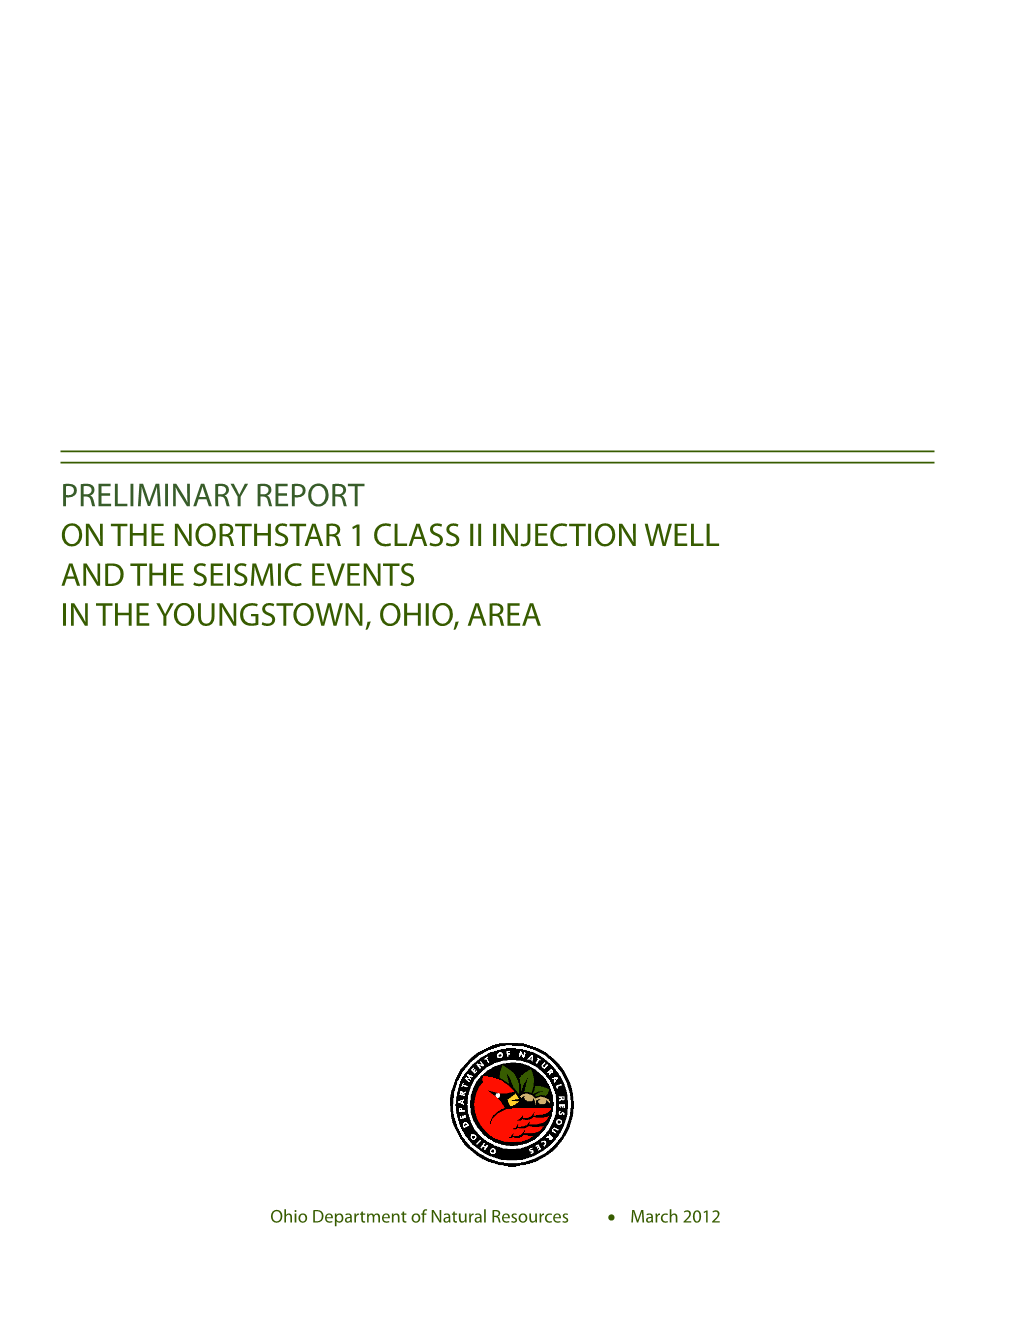 Preliminary Report on the Northstar 1 Class Ii Injection Well and the Seismic Events in the Youngstown, Ohio, Area